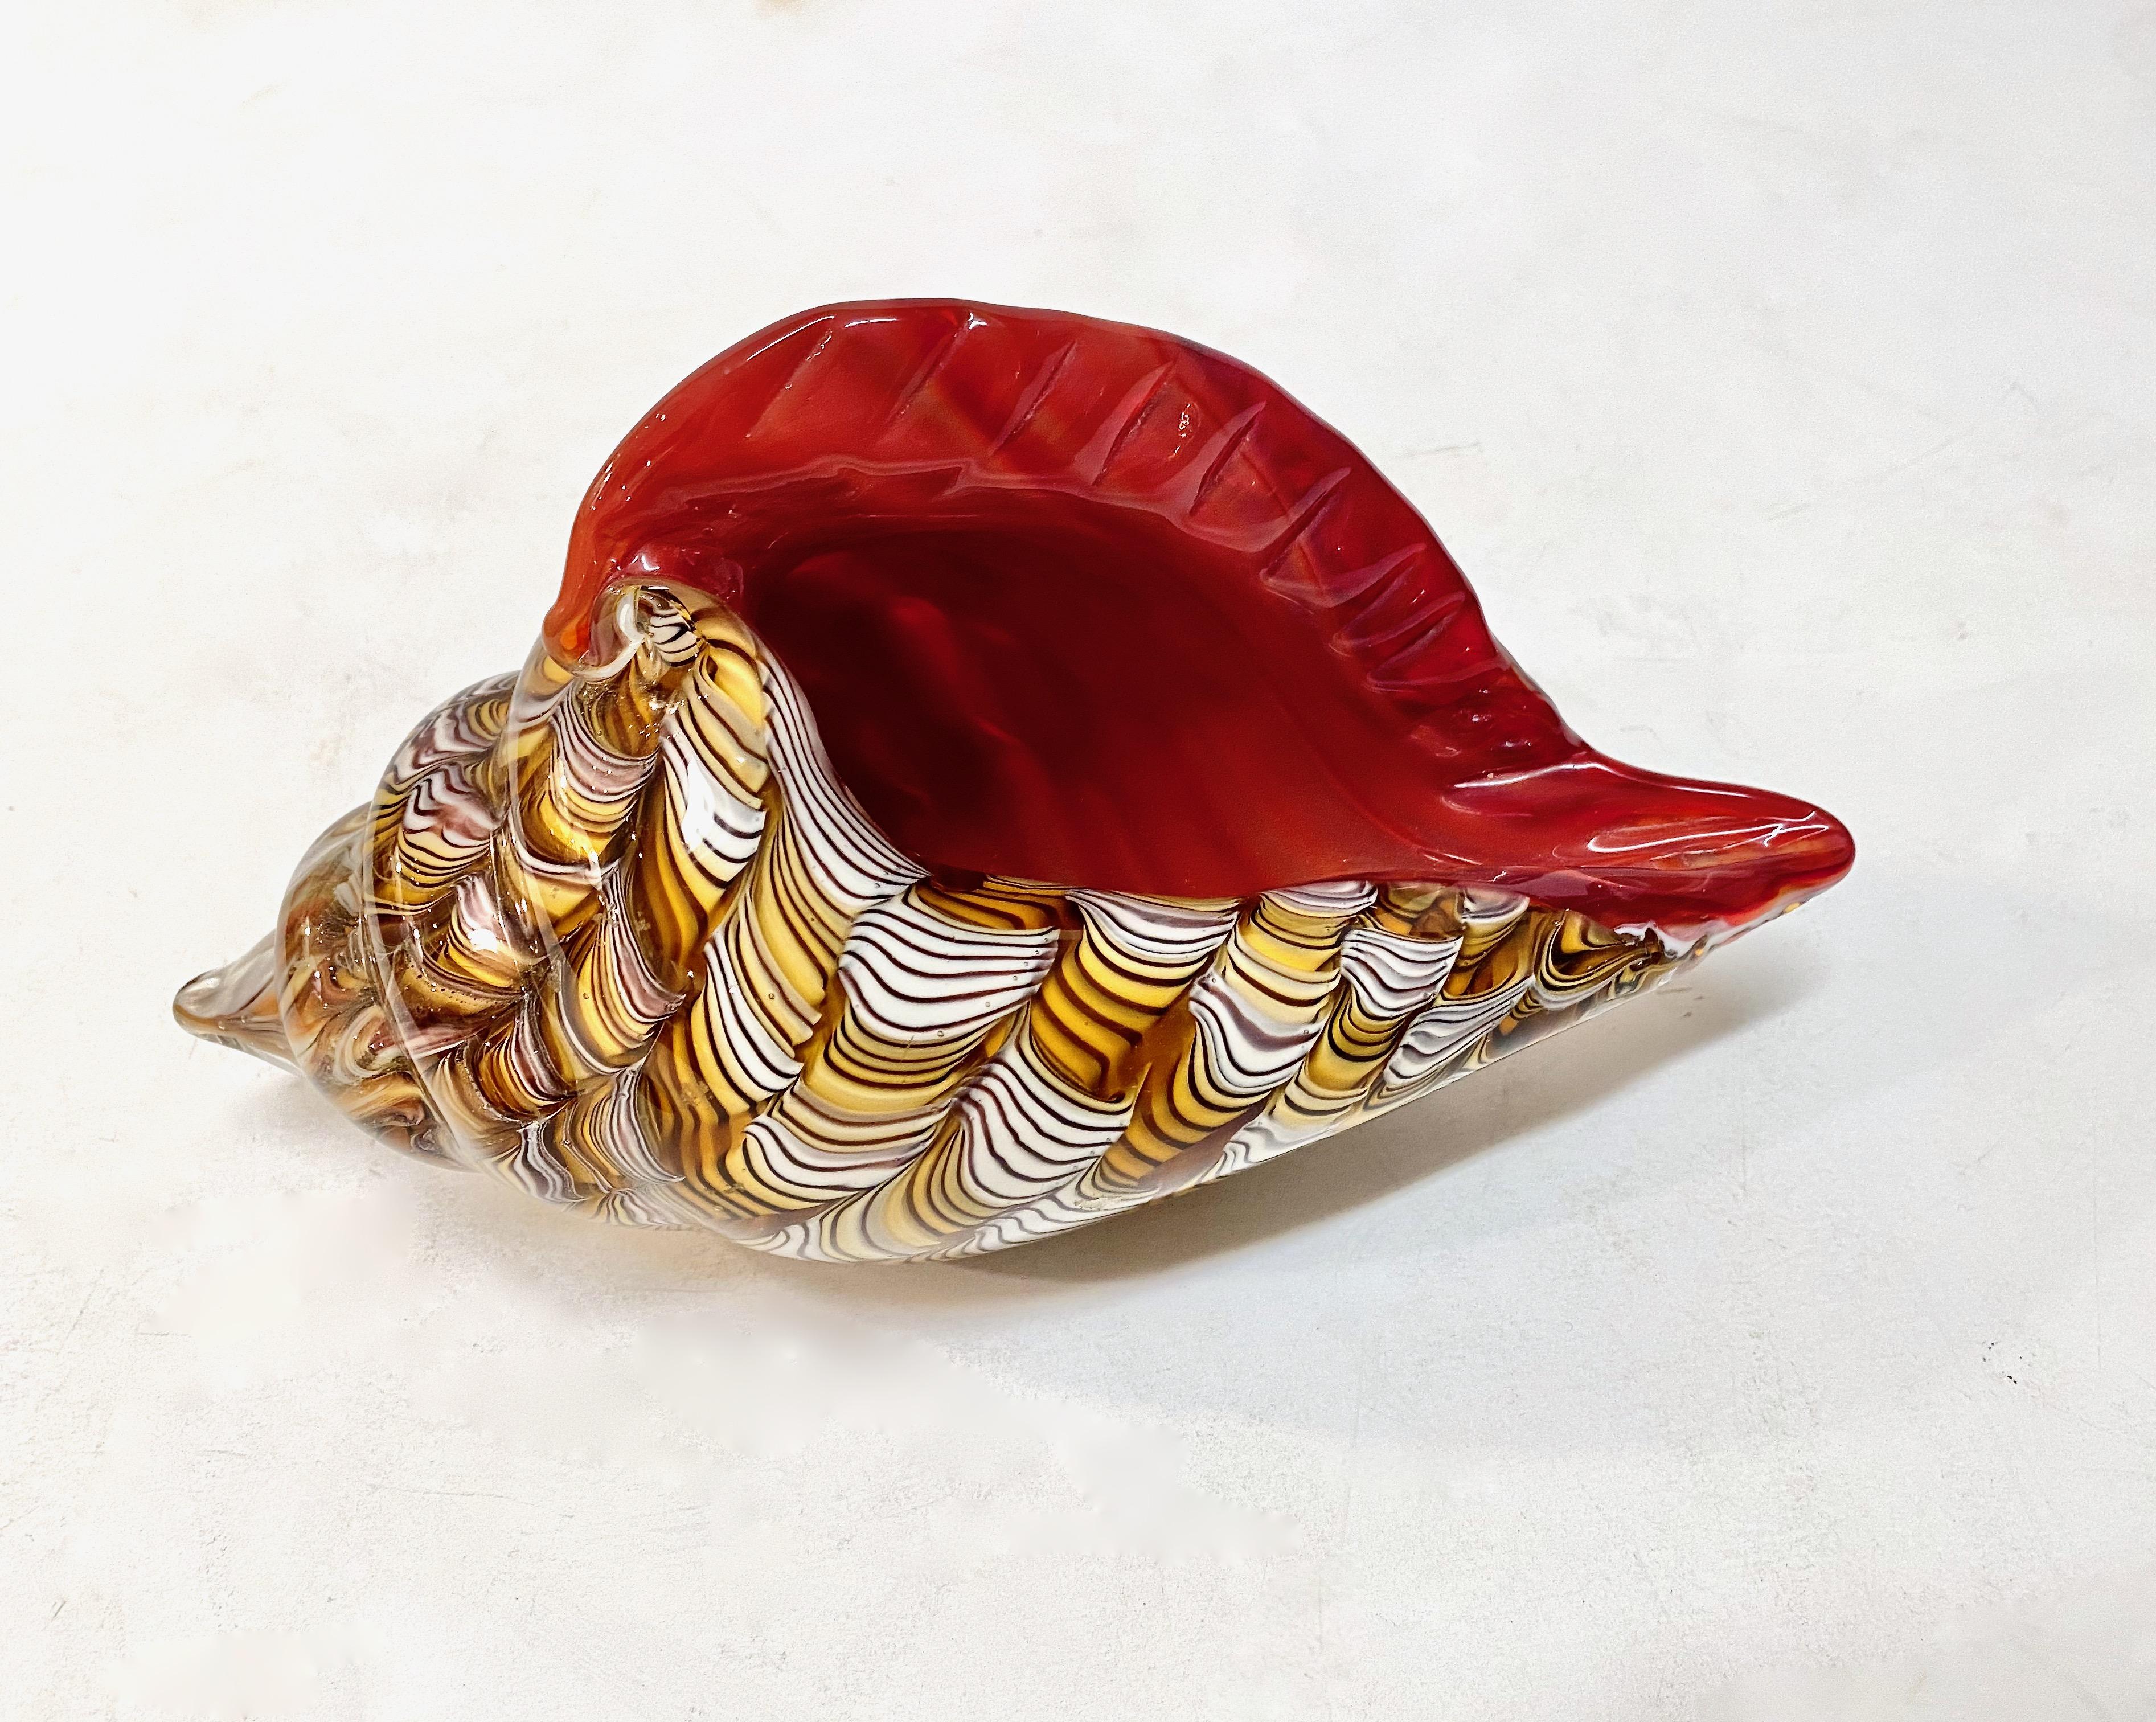 Beautiful mid-century Murano Shell sculpture or dish. This shell is beautifully designed with scrolls of toffee, honey and ivory cased in red glass. The impressive size of the shell combined with the positive energy of the multi-color design makes